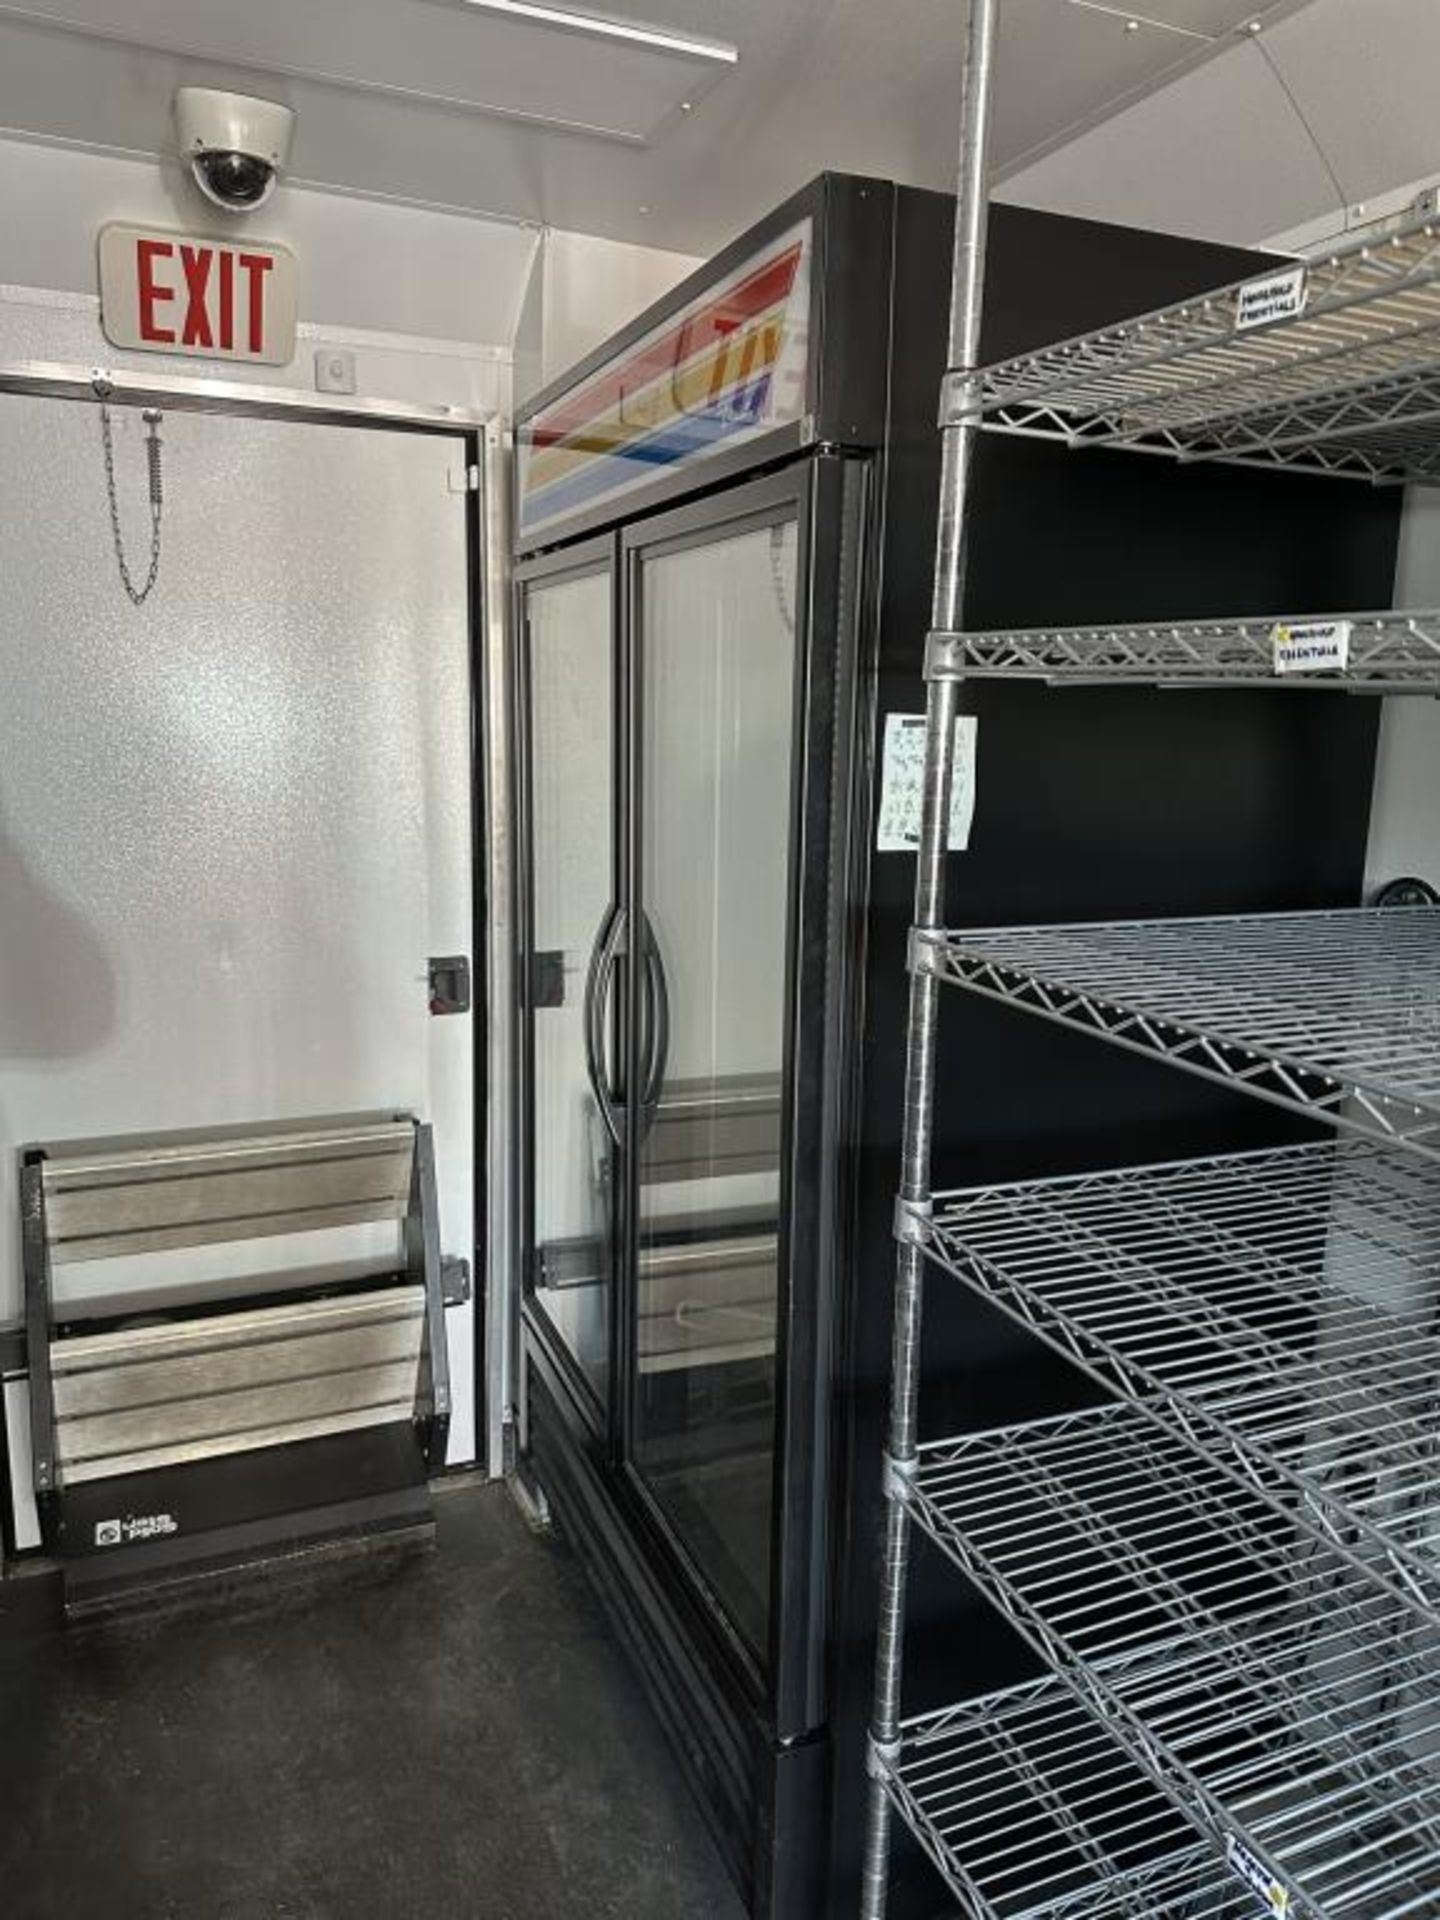 2021 Food Service Support Trailer - Image 13 of 20